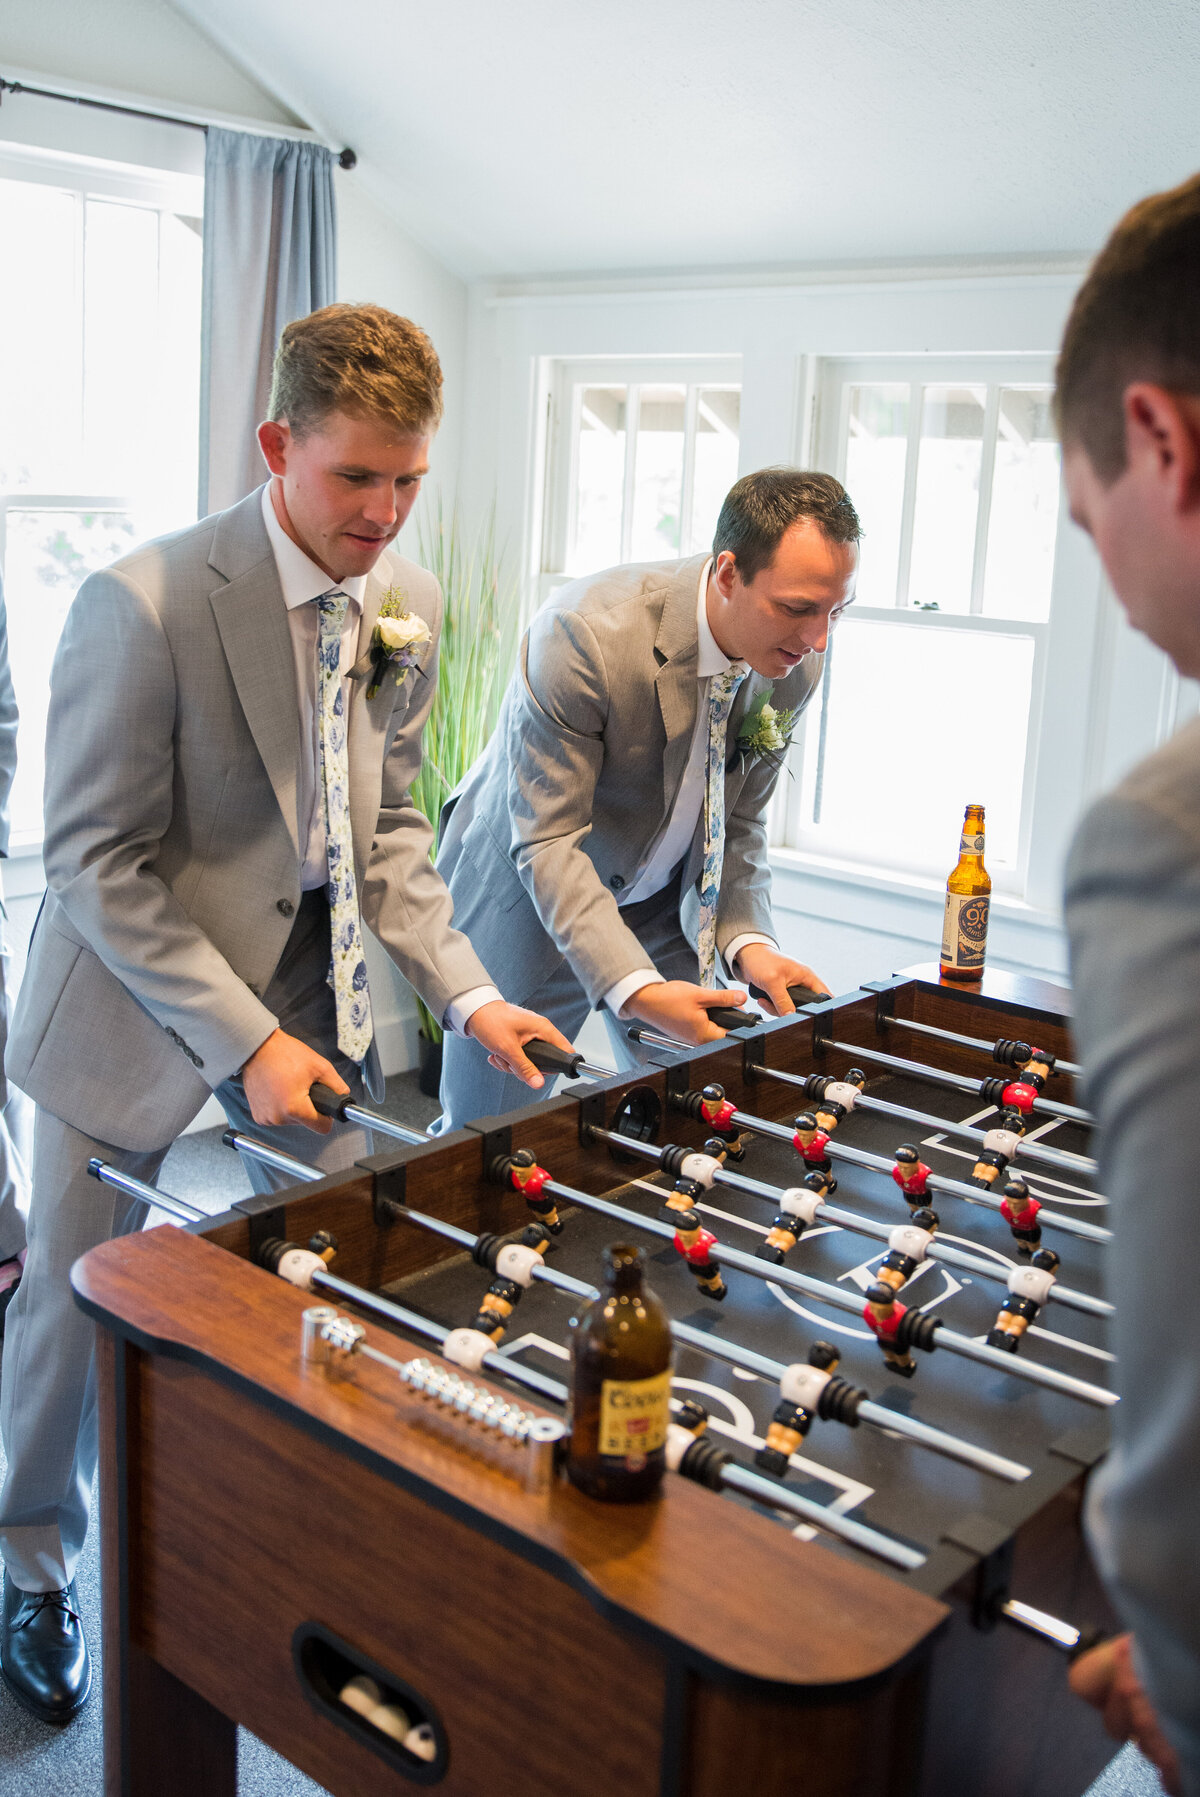 A group of groomsmen play foosball after getting ready on the wedding day.